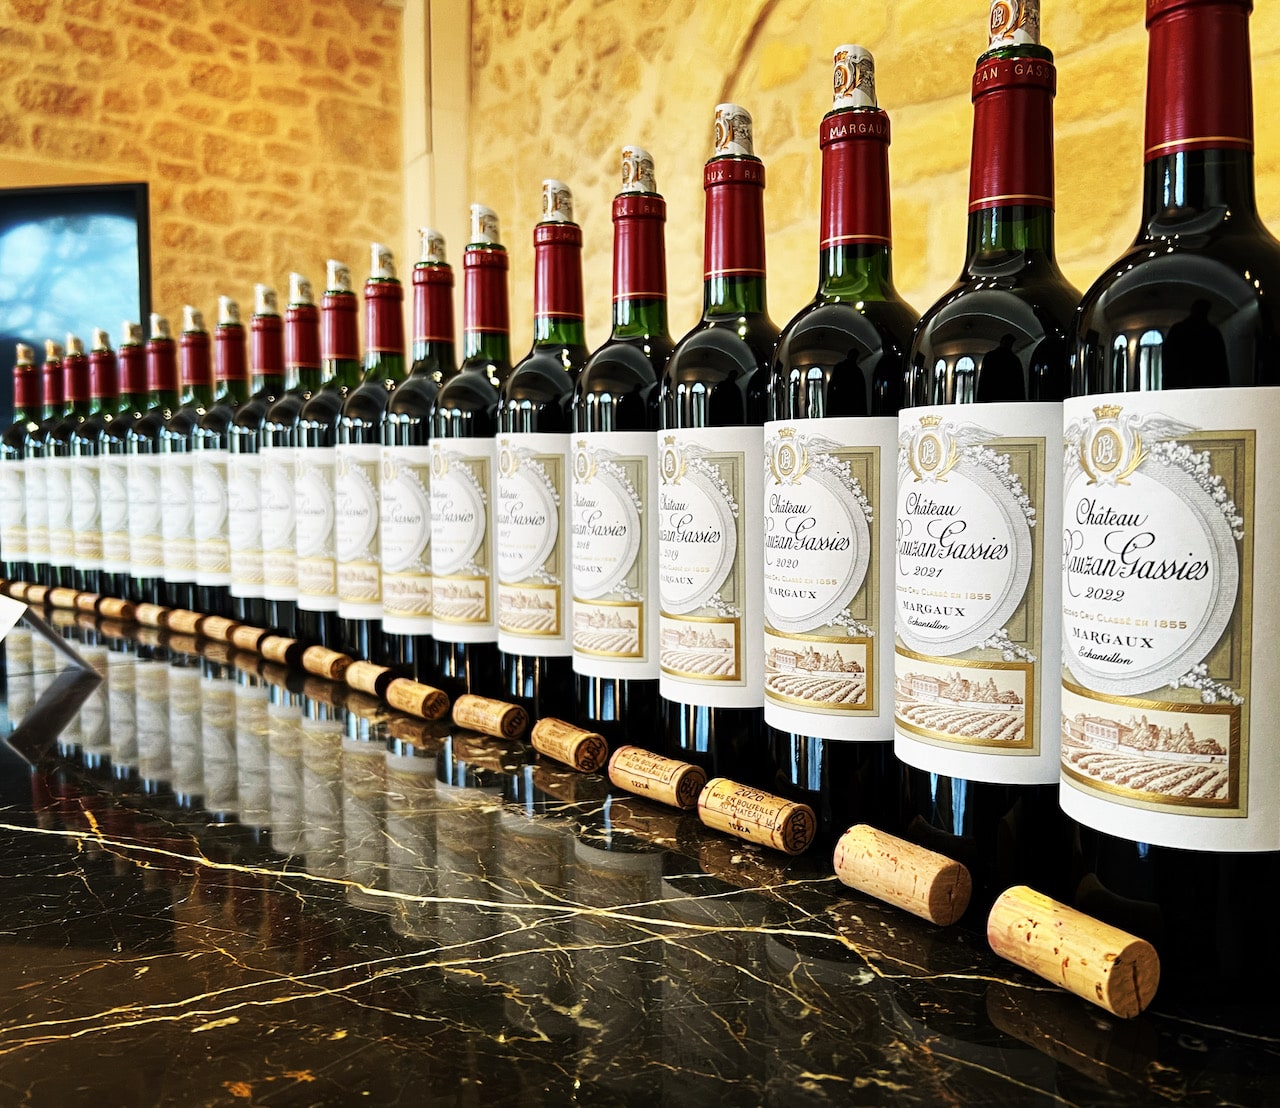 You are currently viewing <span class="dojodigital_toggle_title">Verticale de Château Rauzan Gassies, appellation Margaux. 2003-2021</span>